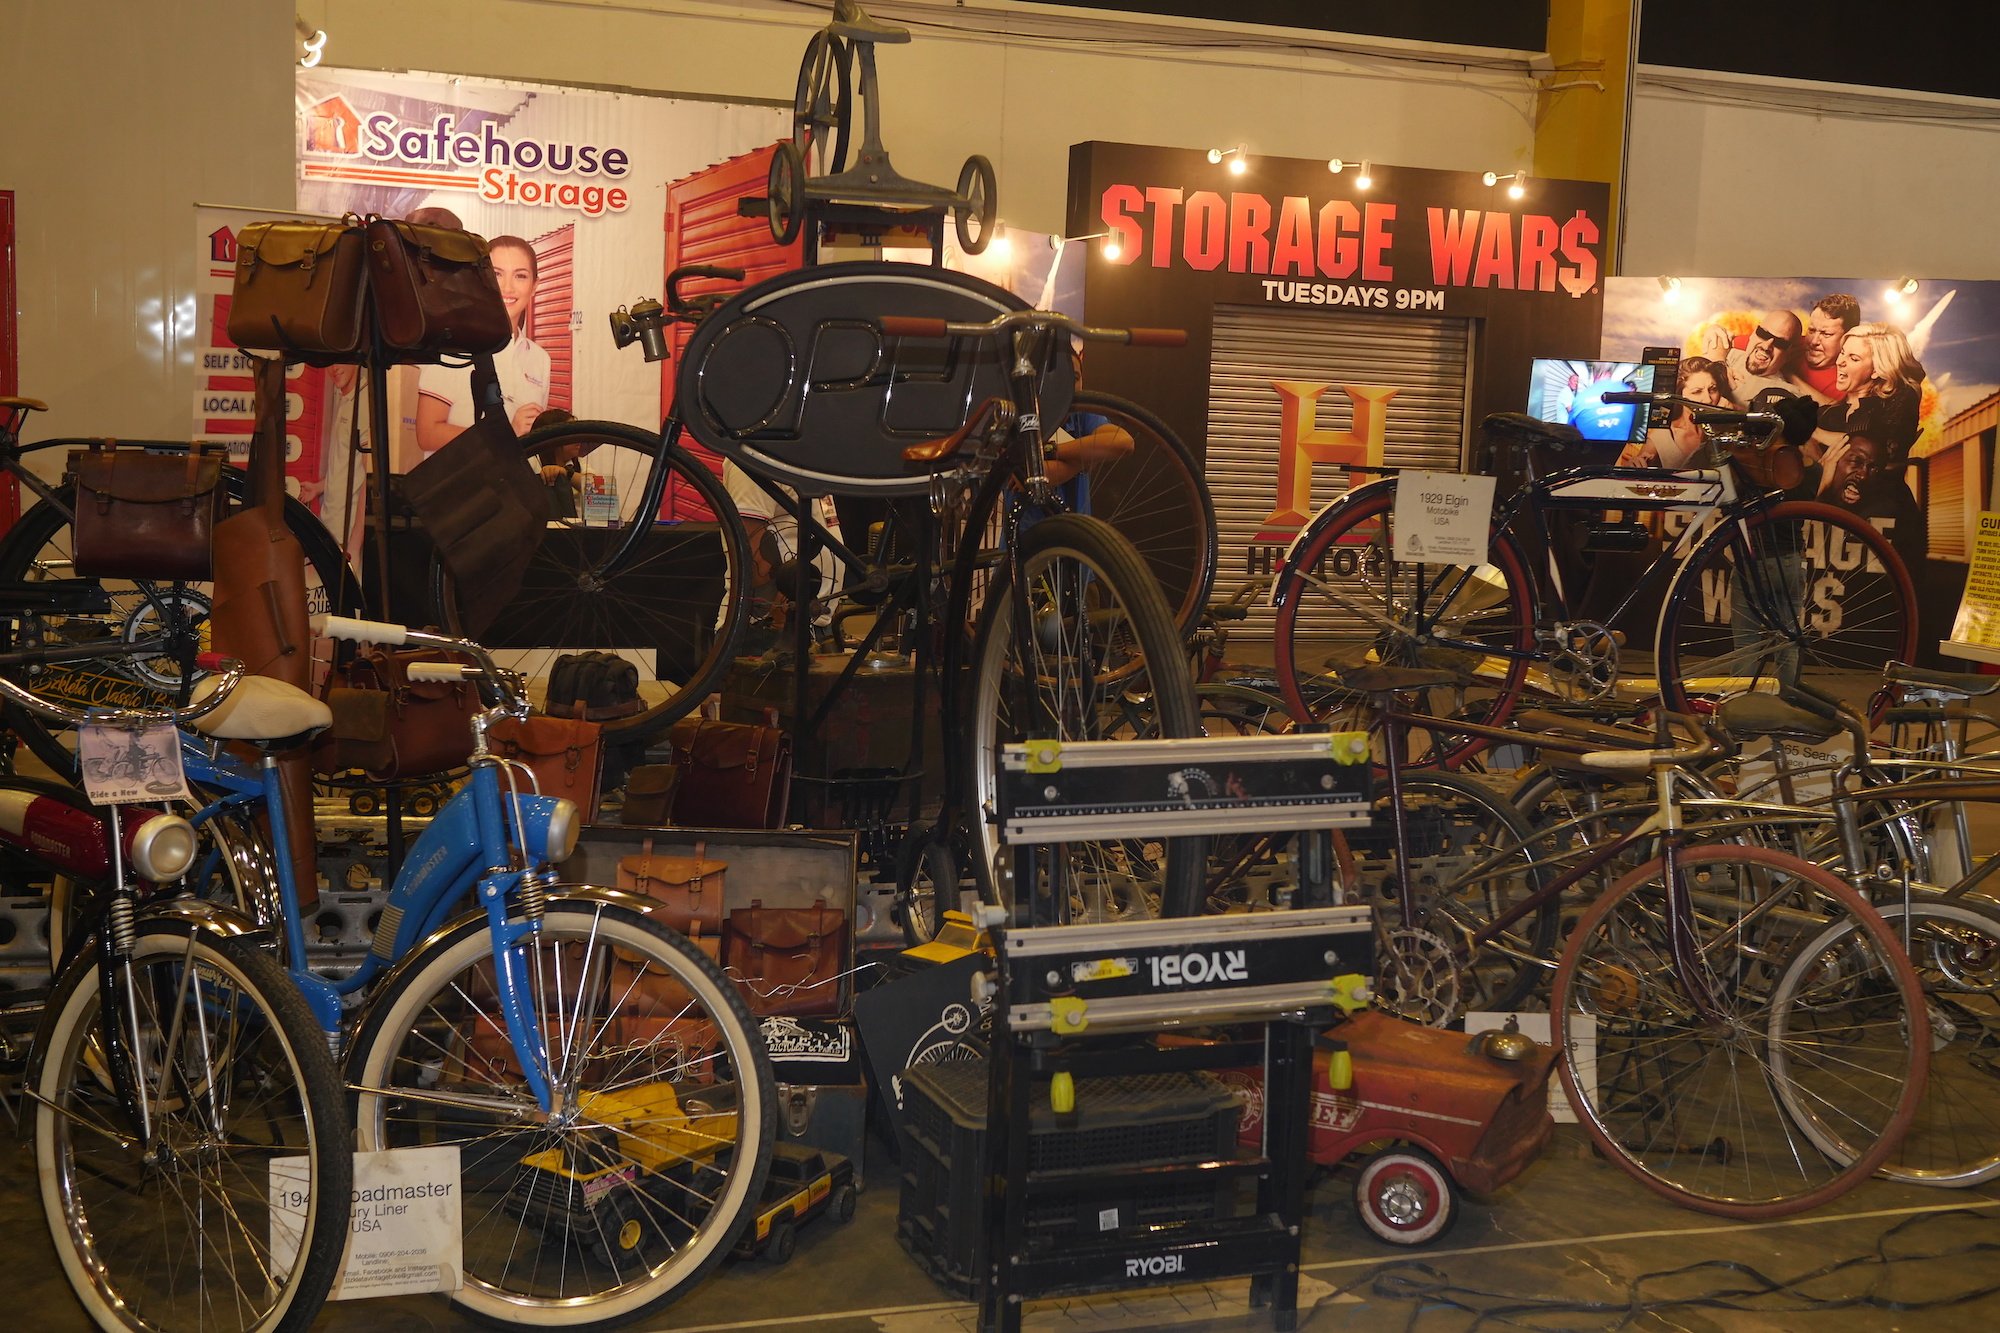 Storage Wars display full of old bikes, hardware, signs, and bags